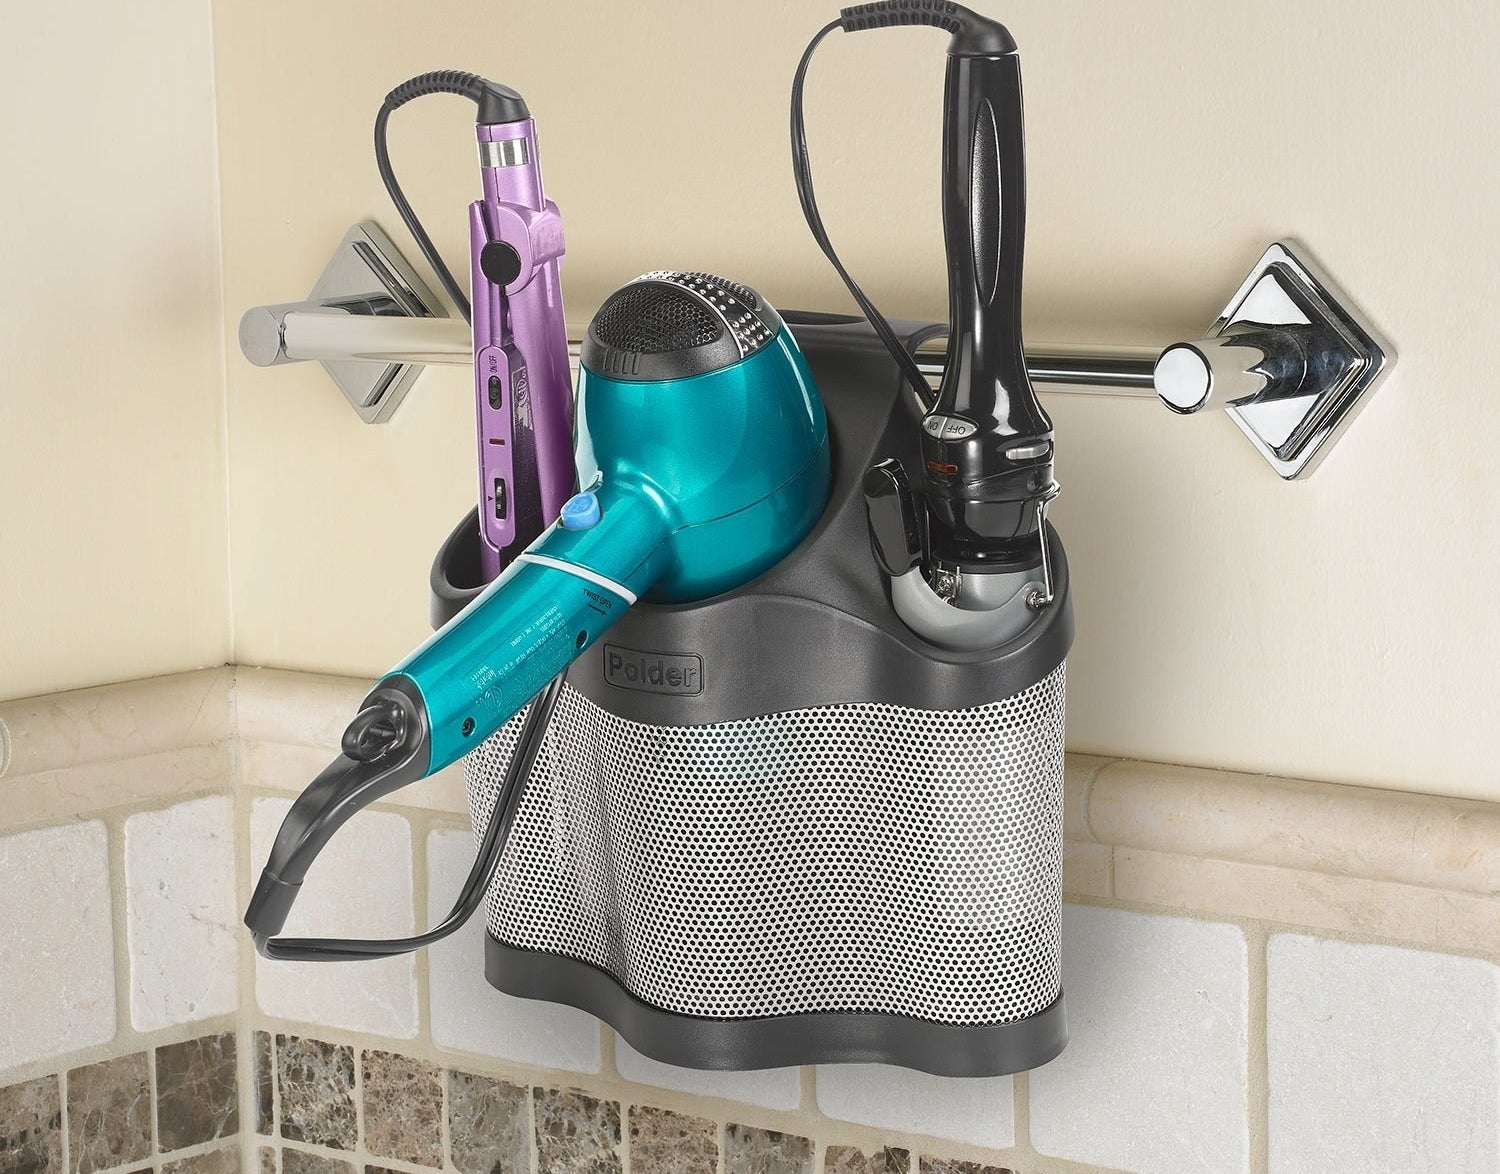 A plastic storage organizer with three slots hanging from a towel rack in the bathroom In one slot is a hair straightener, in another is hair dryer and in the last one is a curling iron